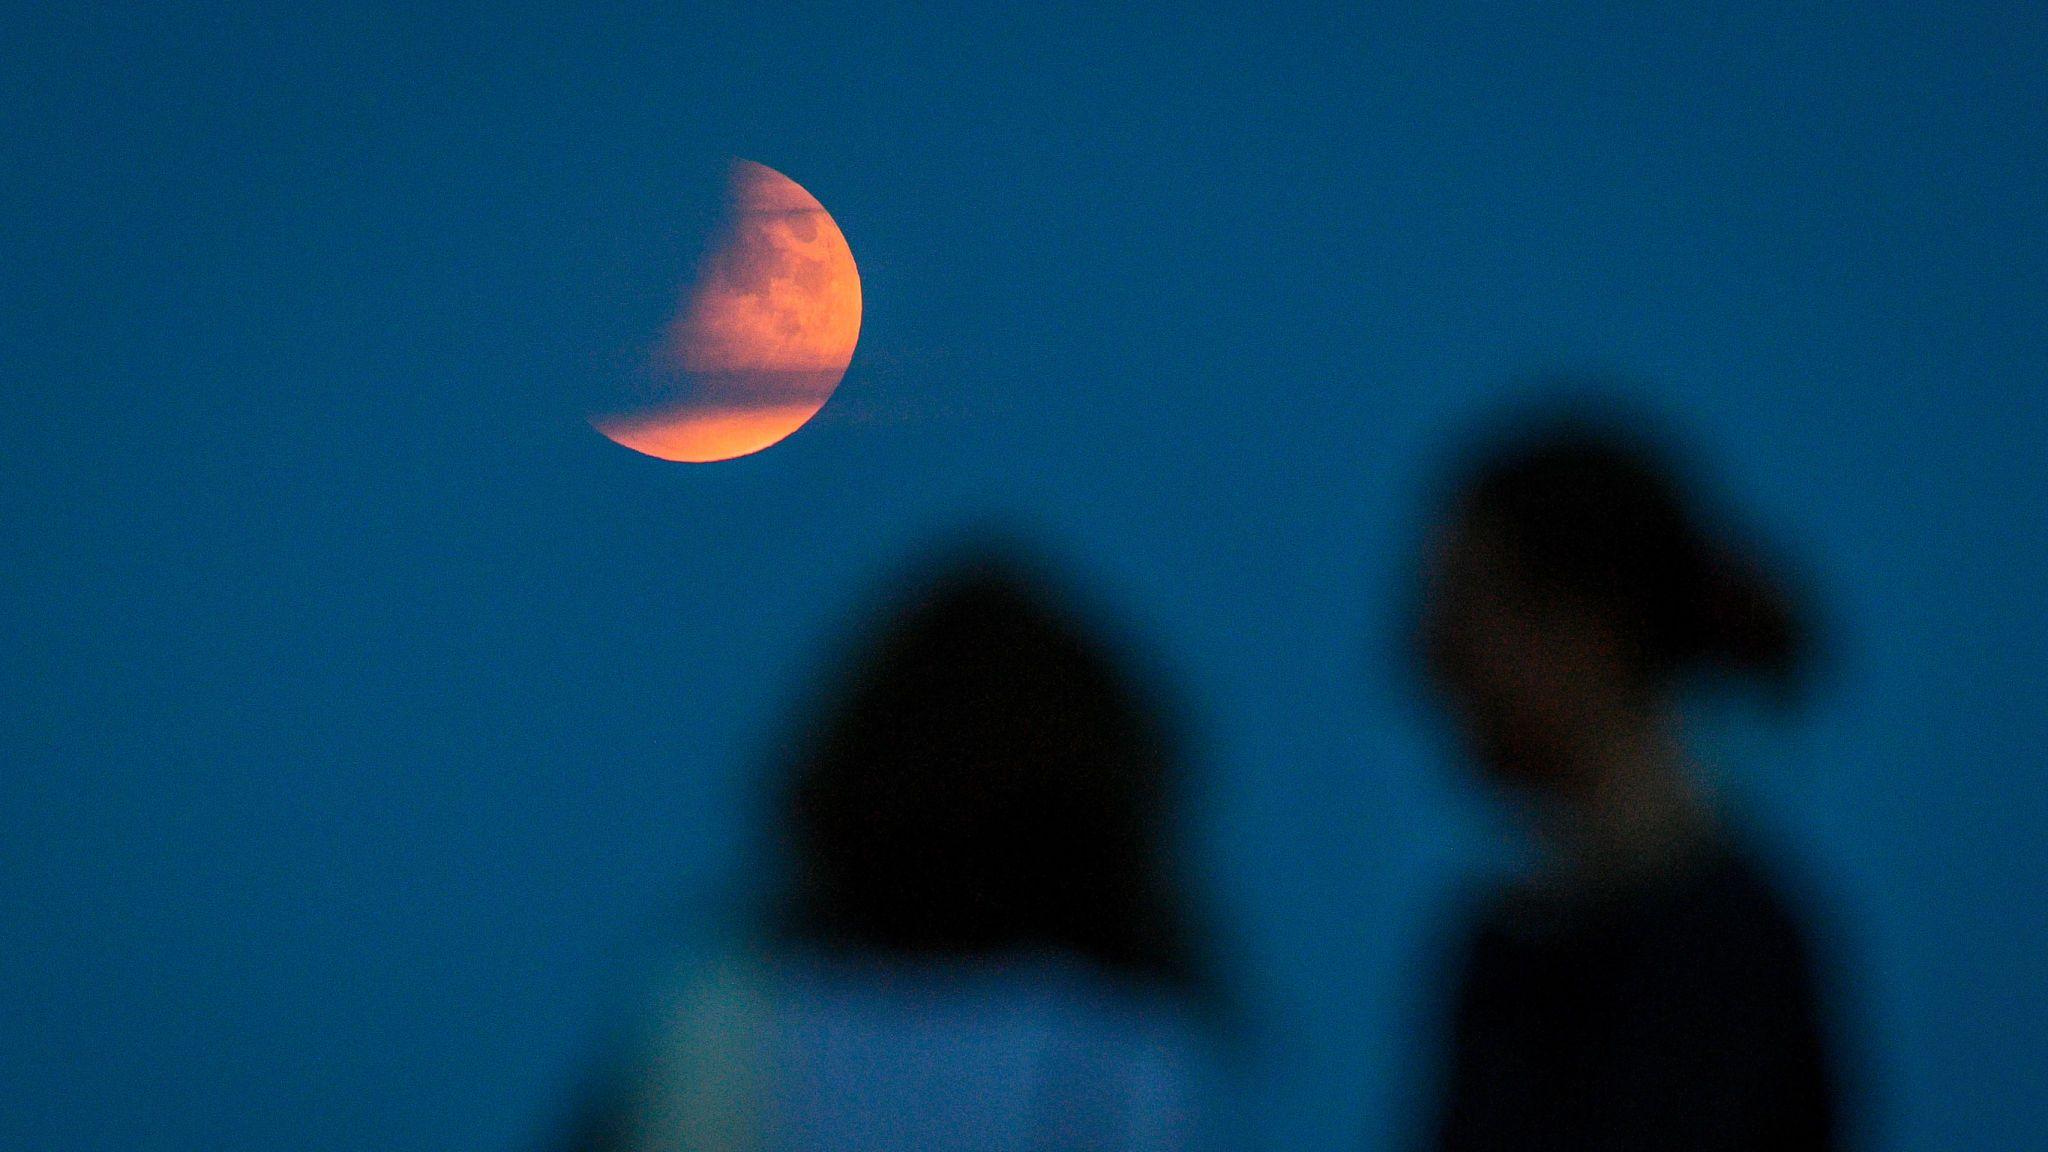 Partial lunar eclipse: Moon's tribute 50 years after historic Apollo